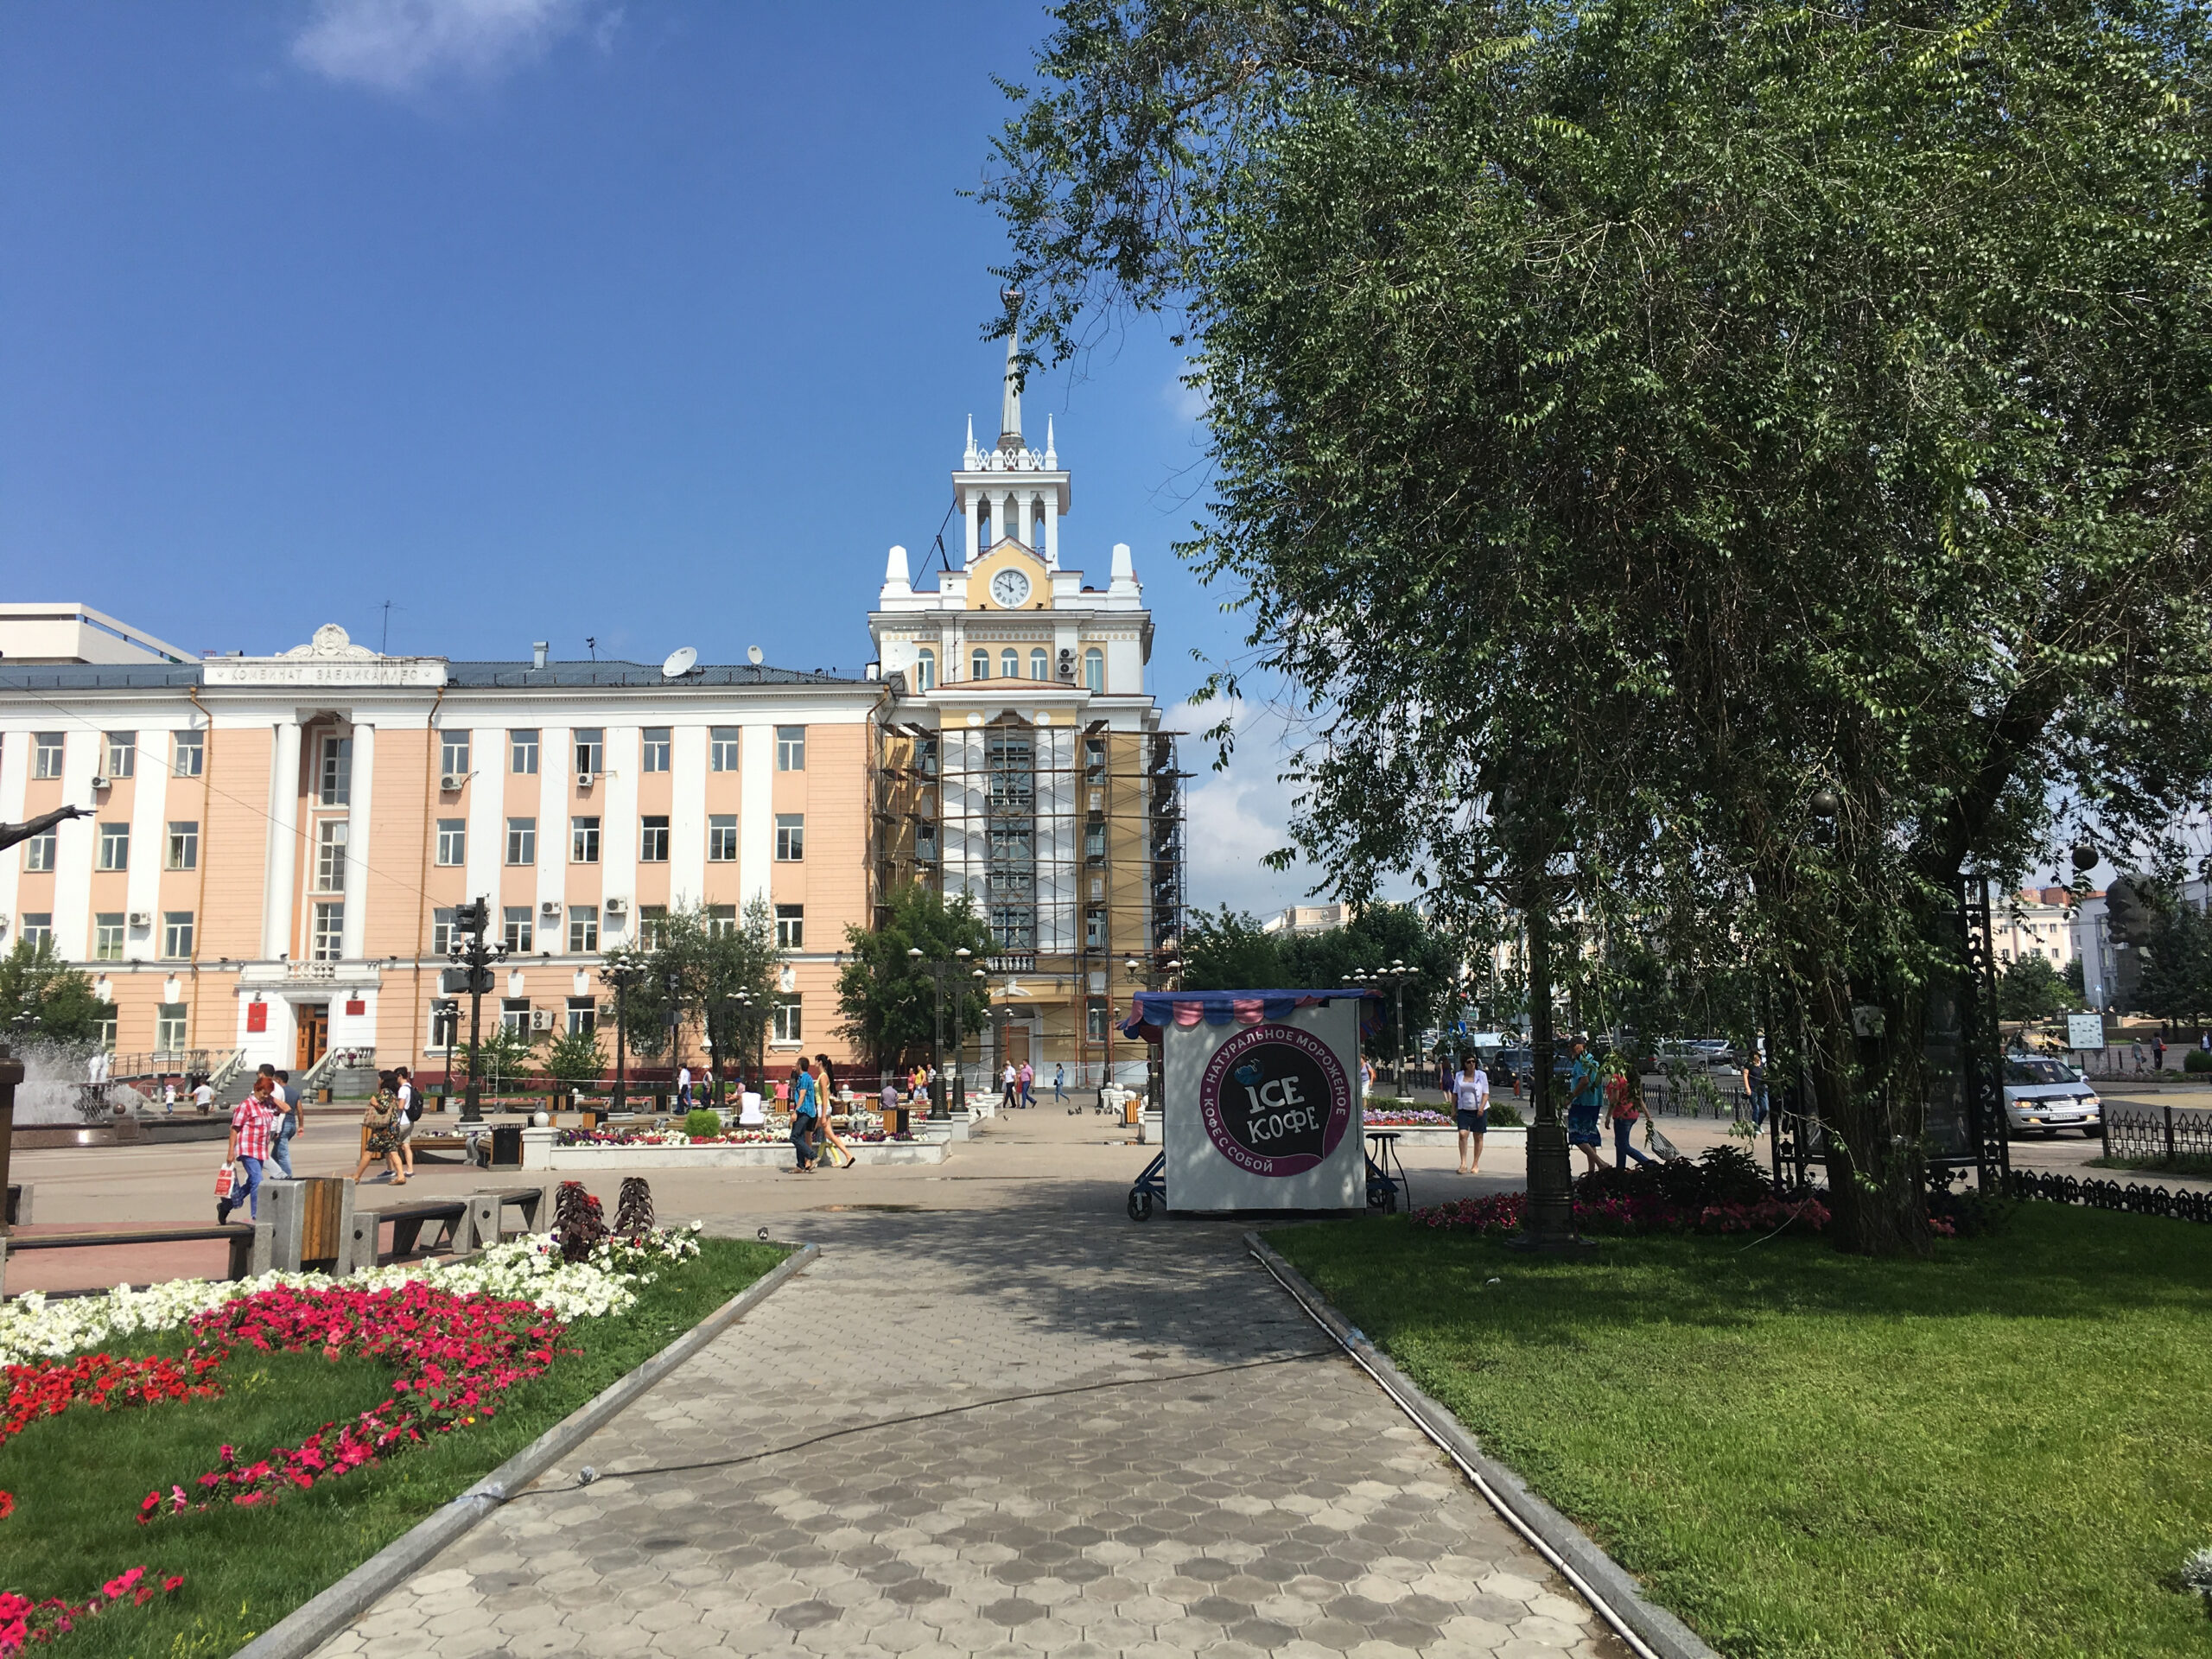 Ulan Ude: A Visit To The Modern Side of the Russian City